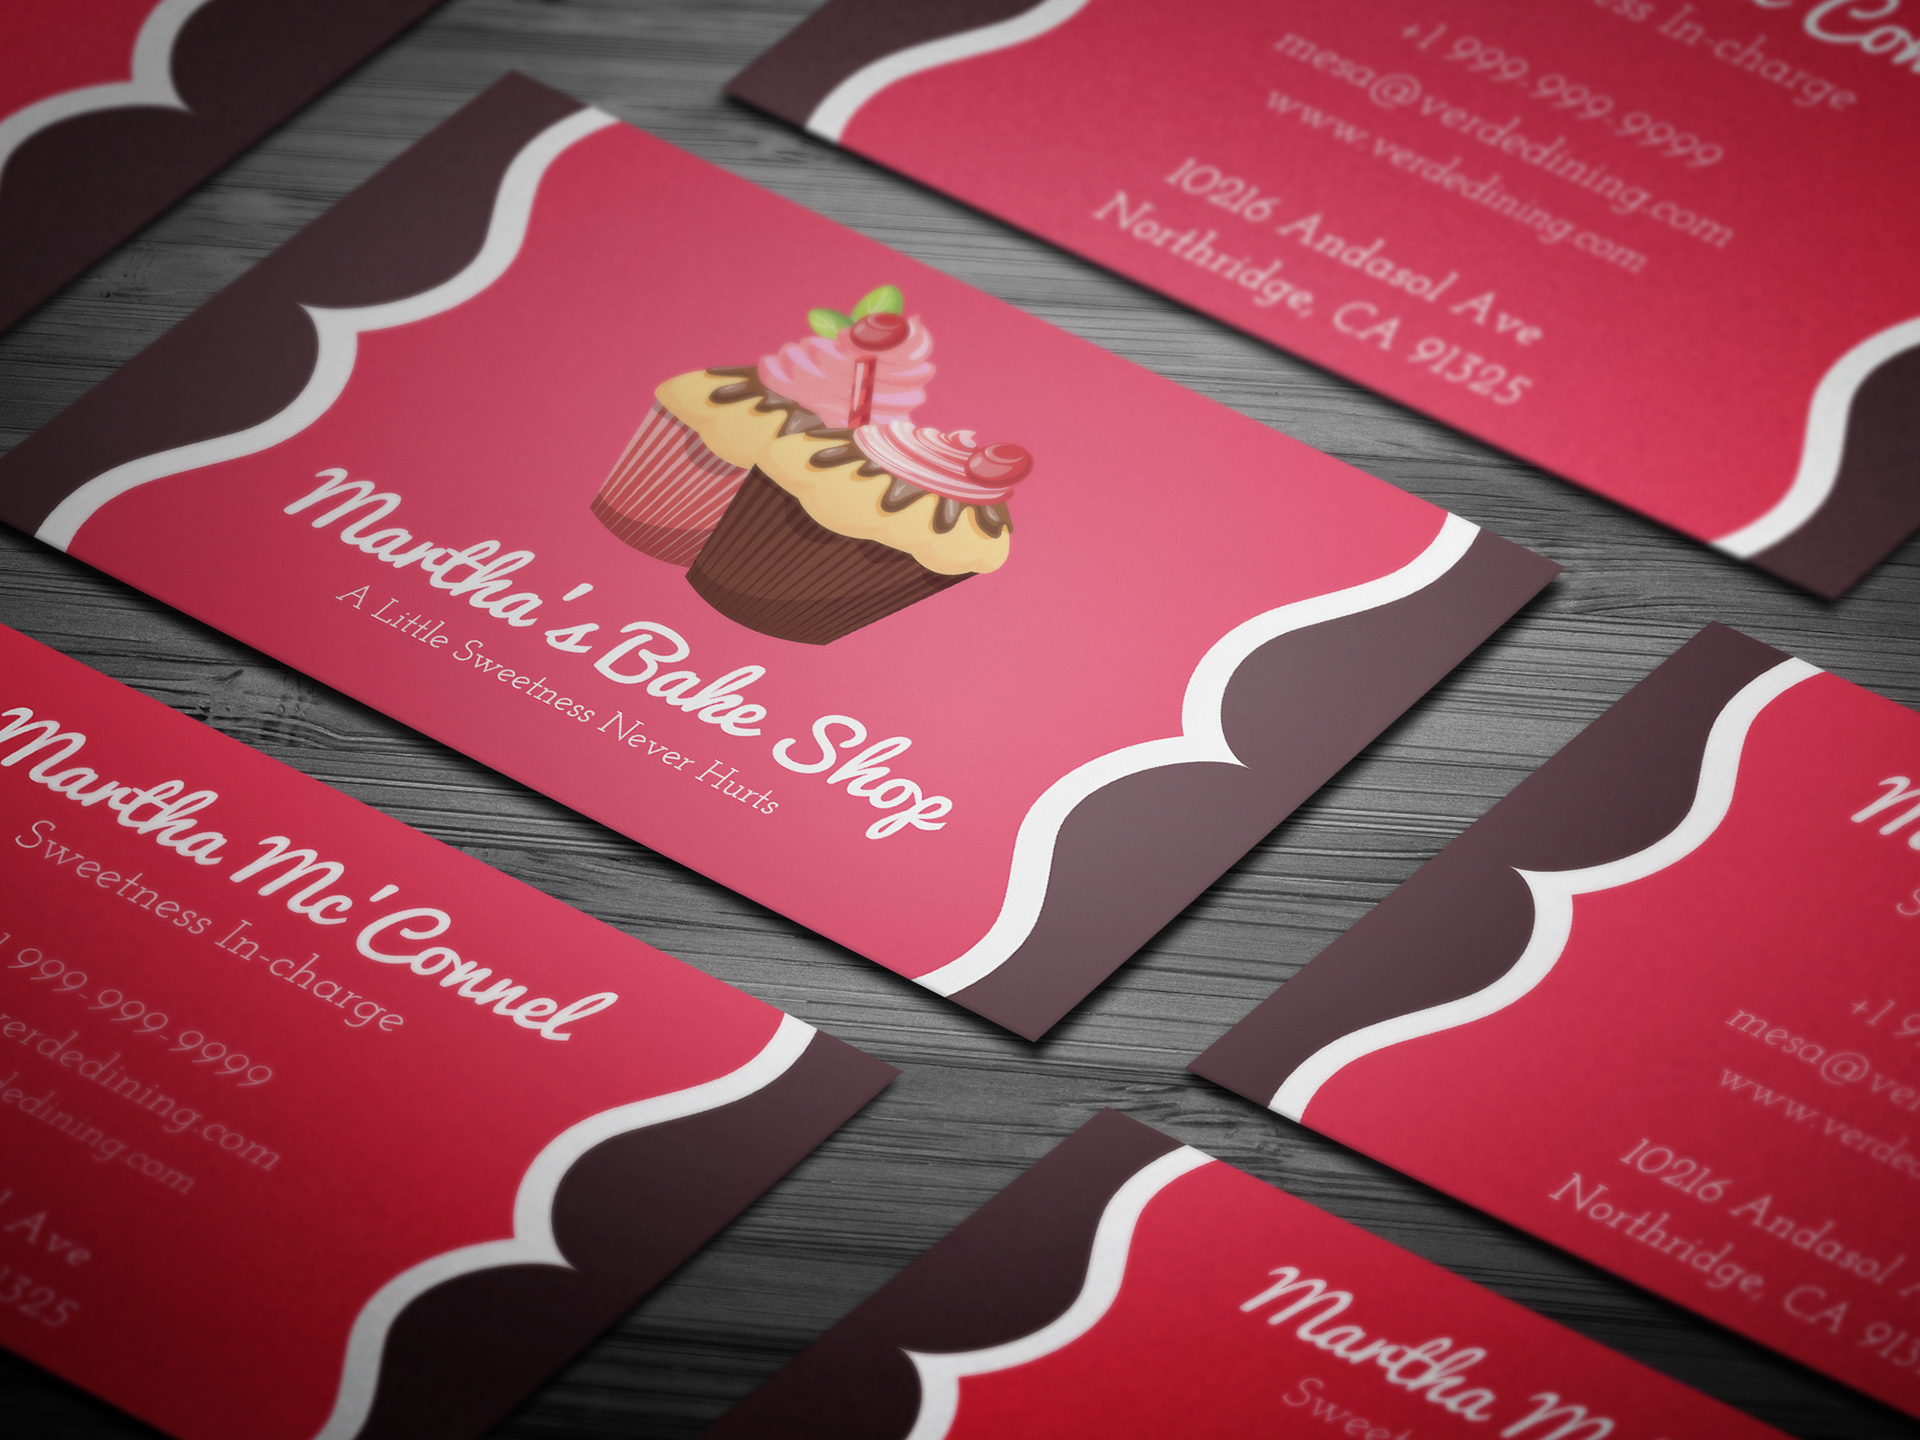 bakery business cards examples 1